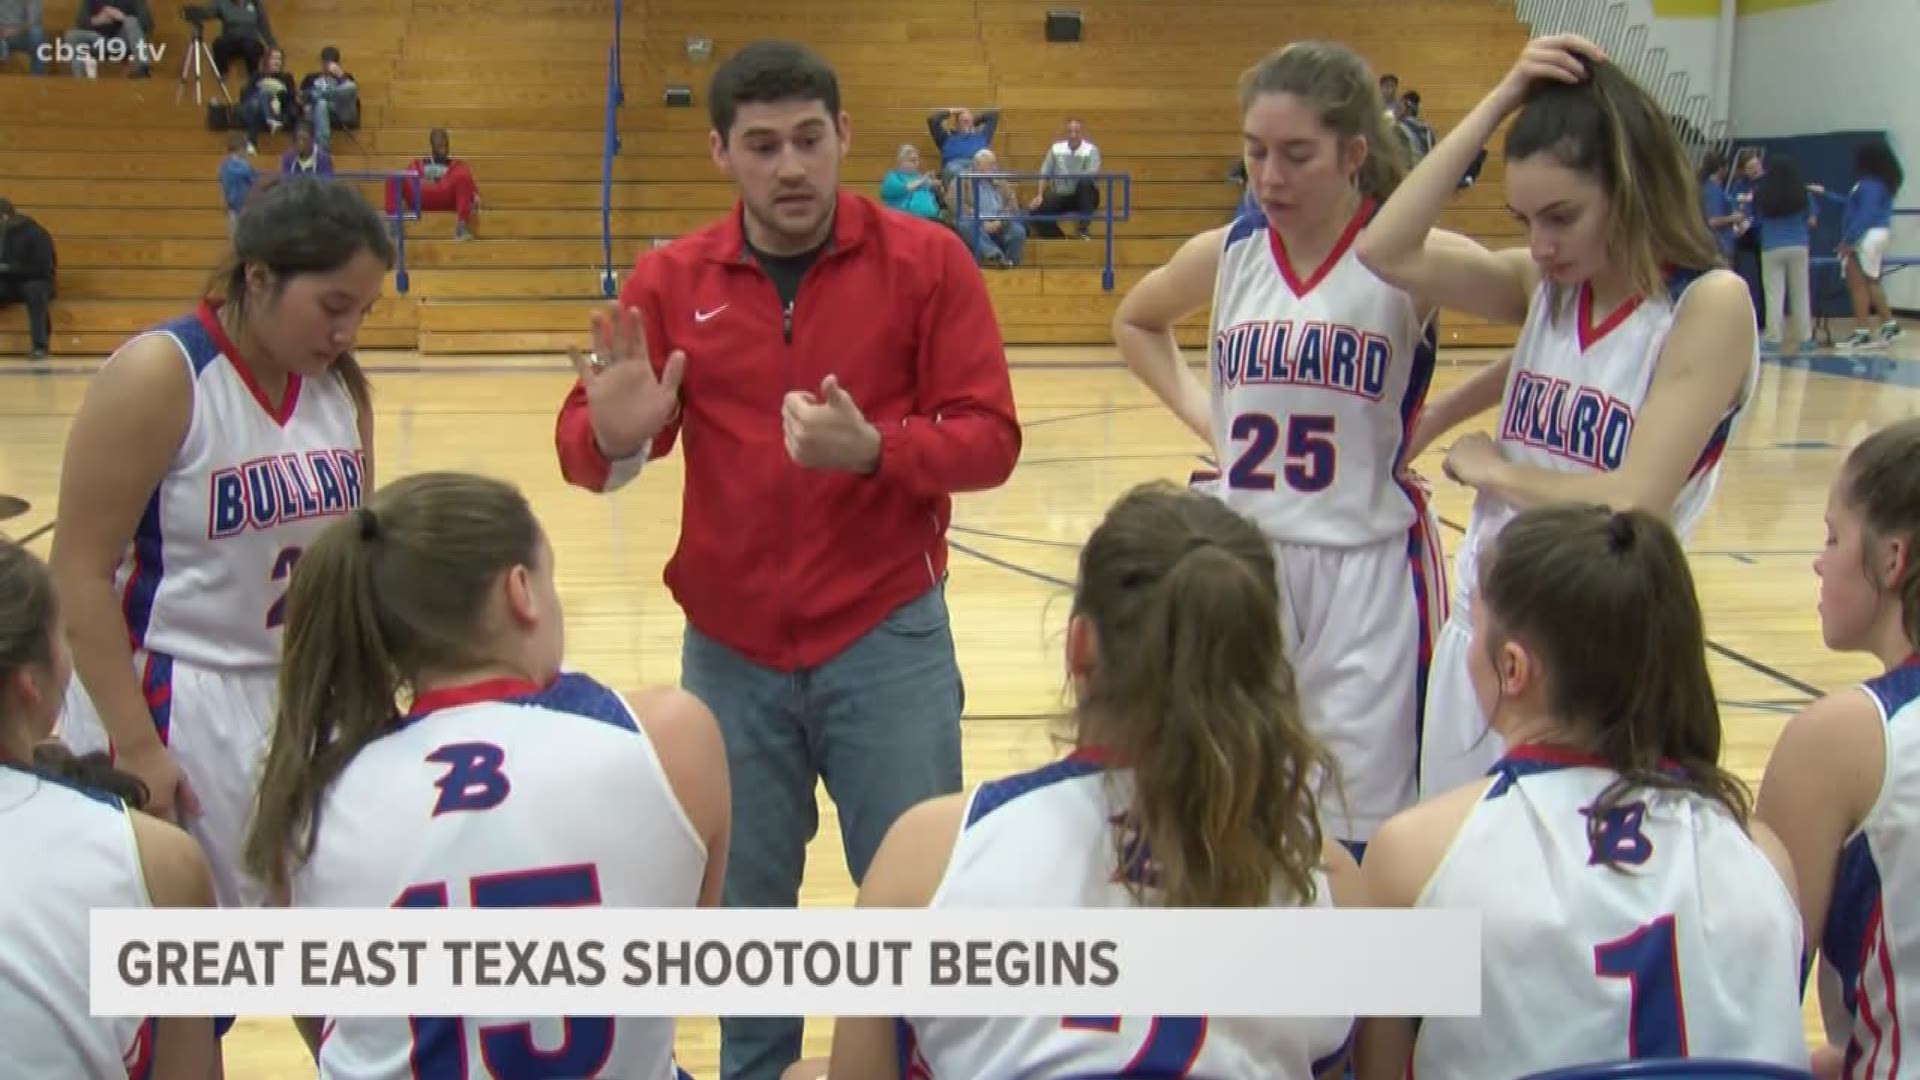 Great East Texas Shootout gets underway